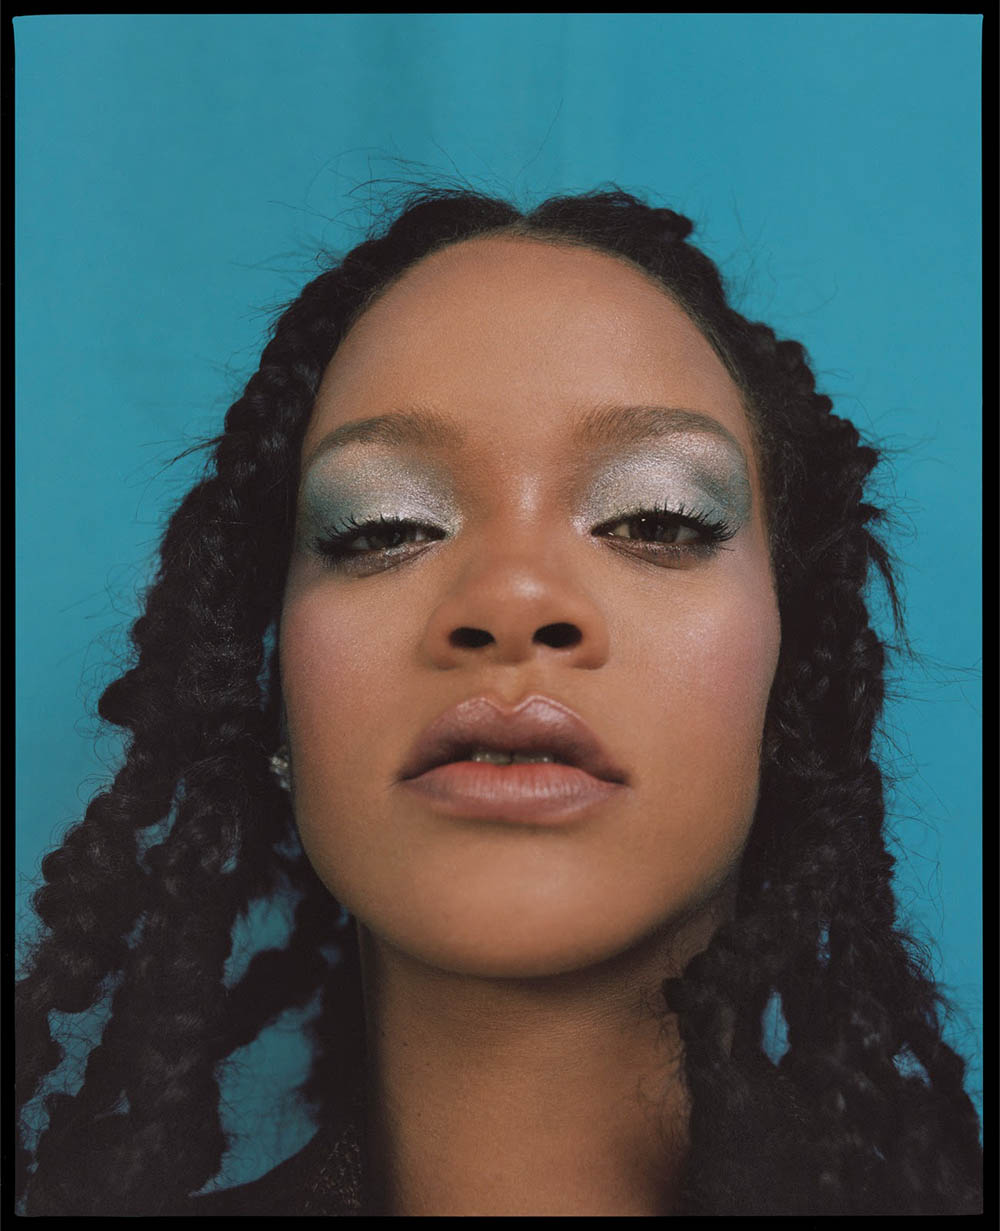 Rihanna covers Allure US October 2018 by Nadine Ijewere